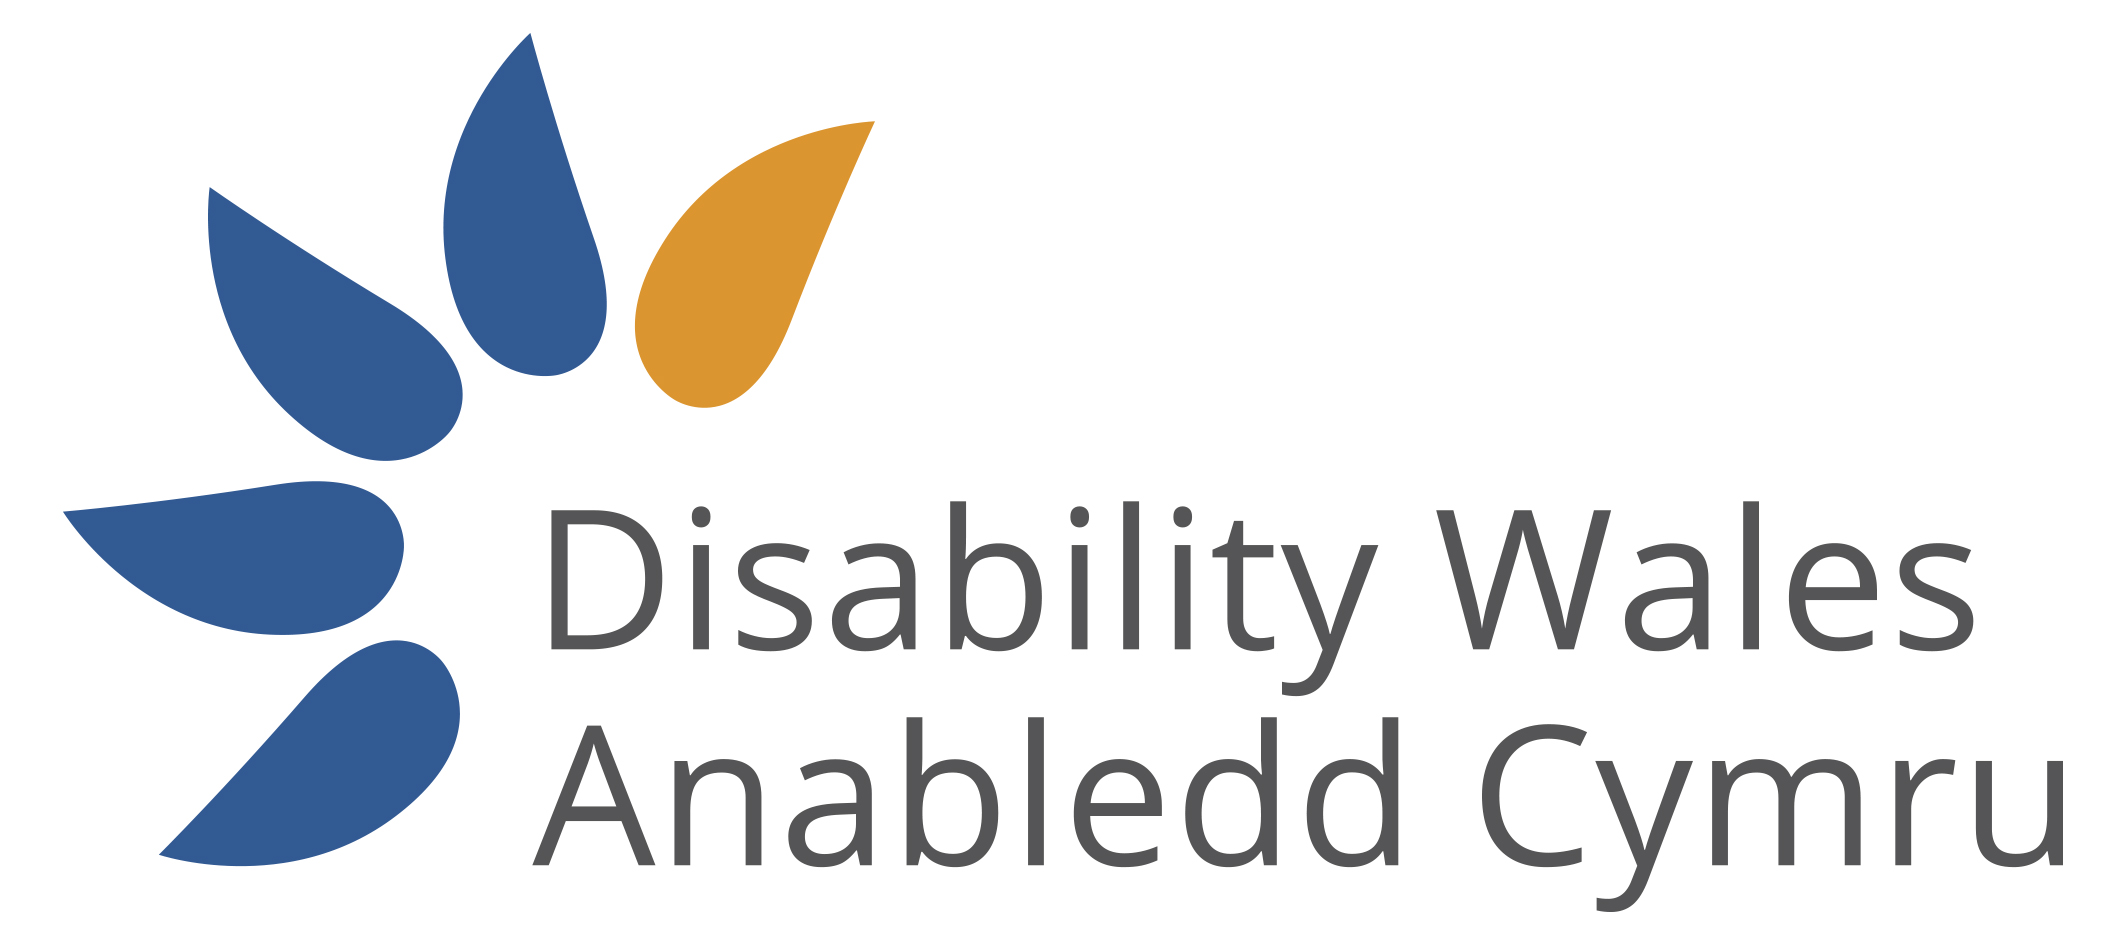 Thumbnail Image for Social Model of Disability: Imagery and language